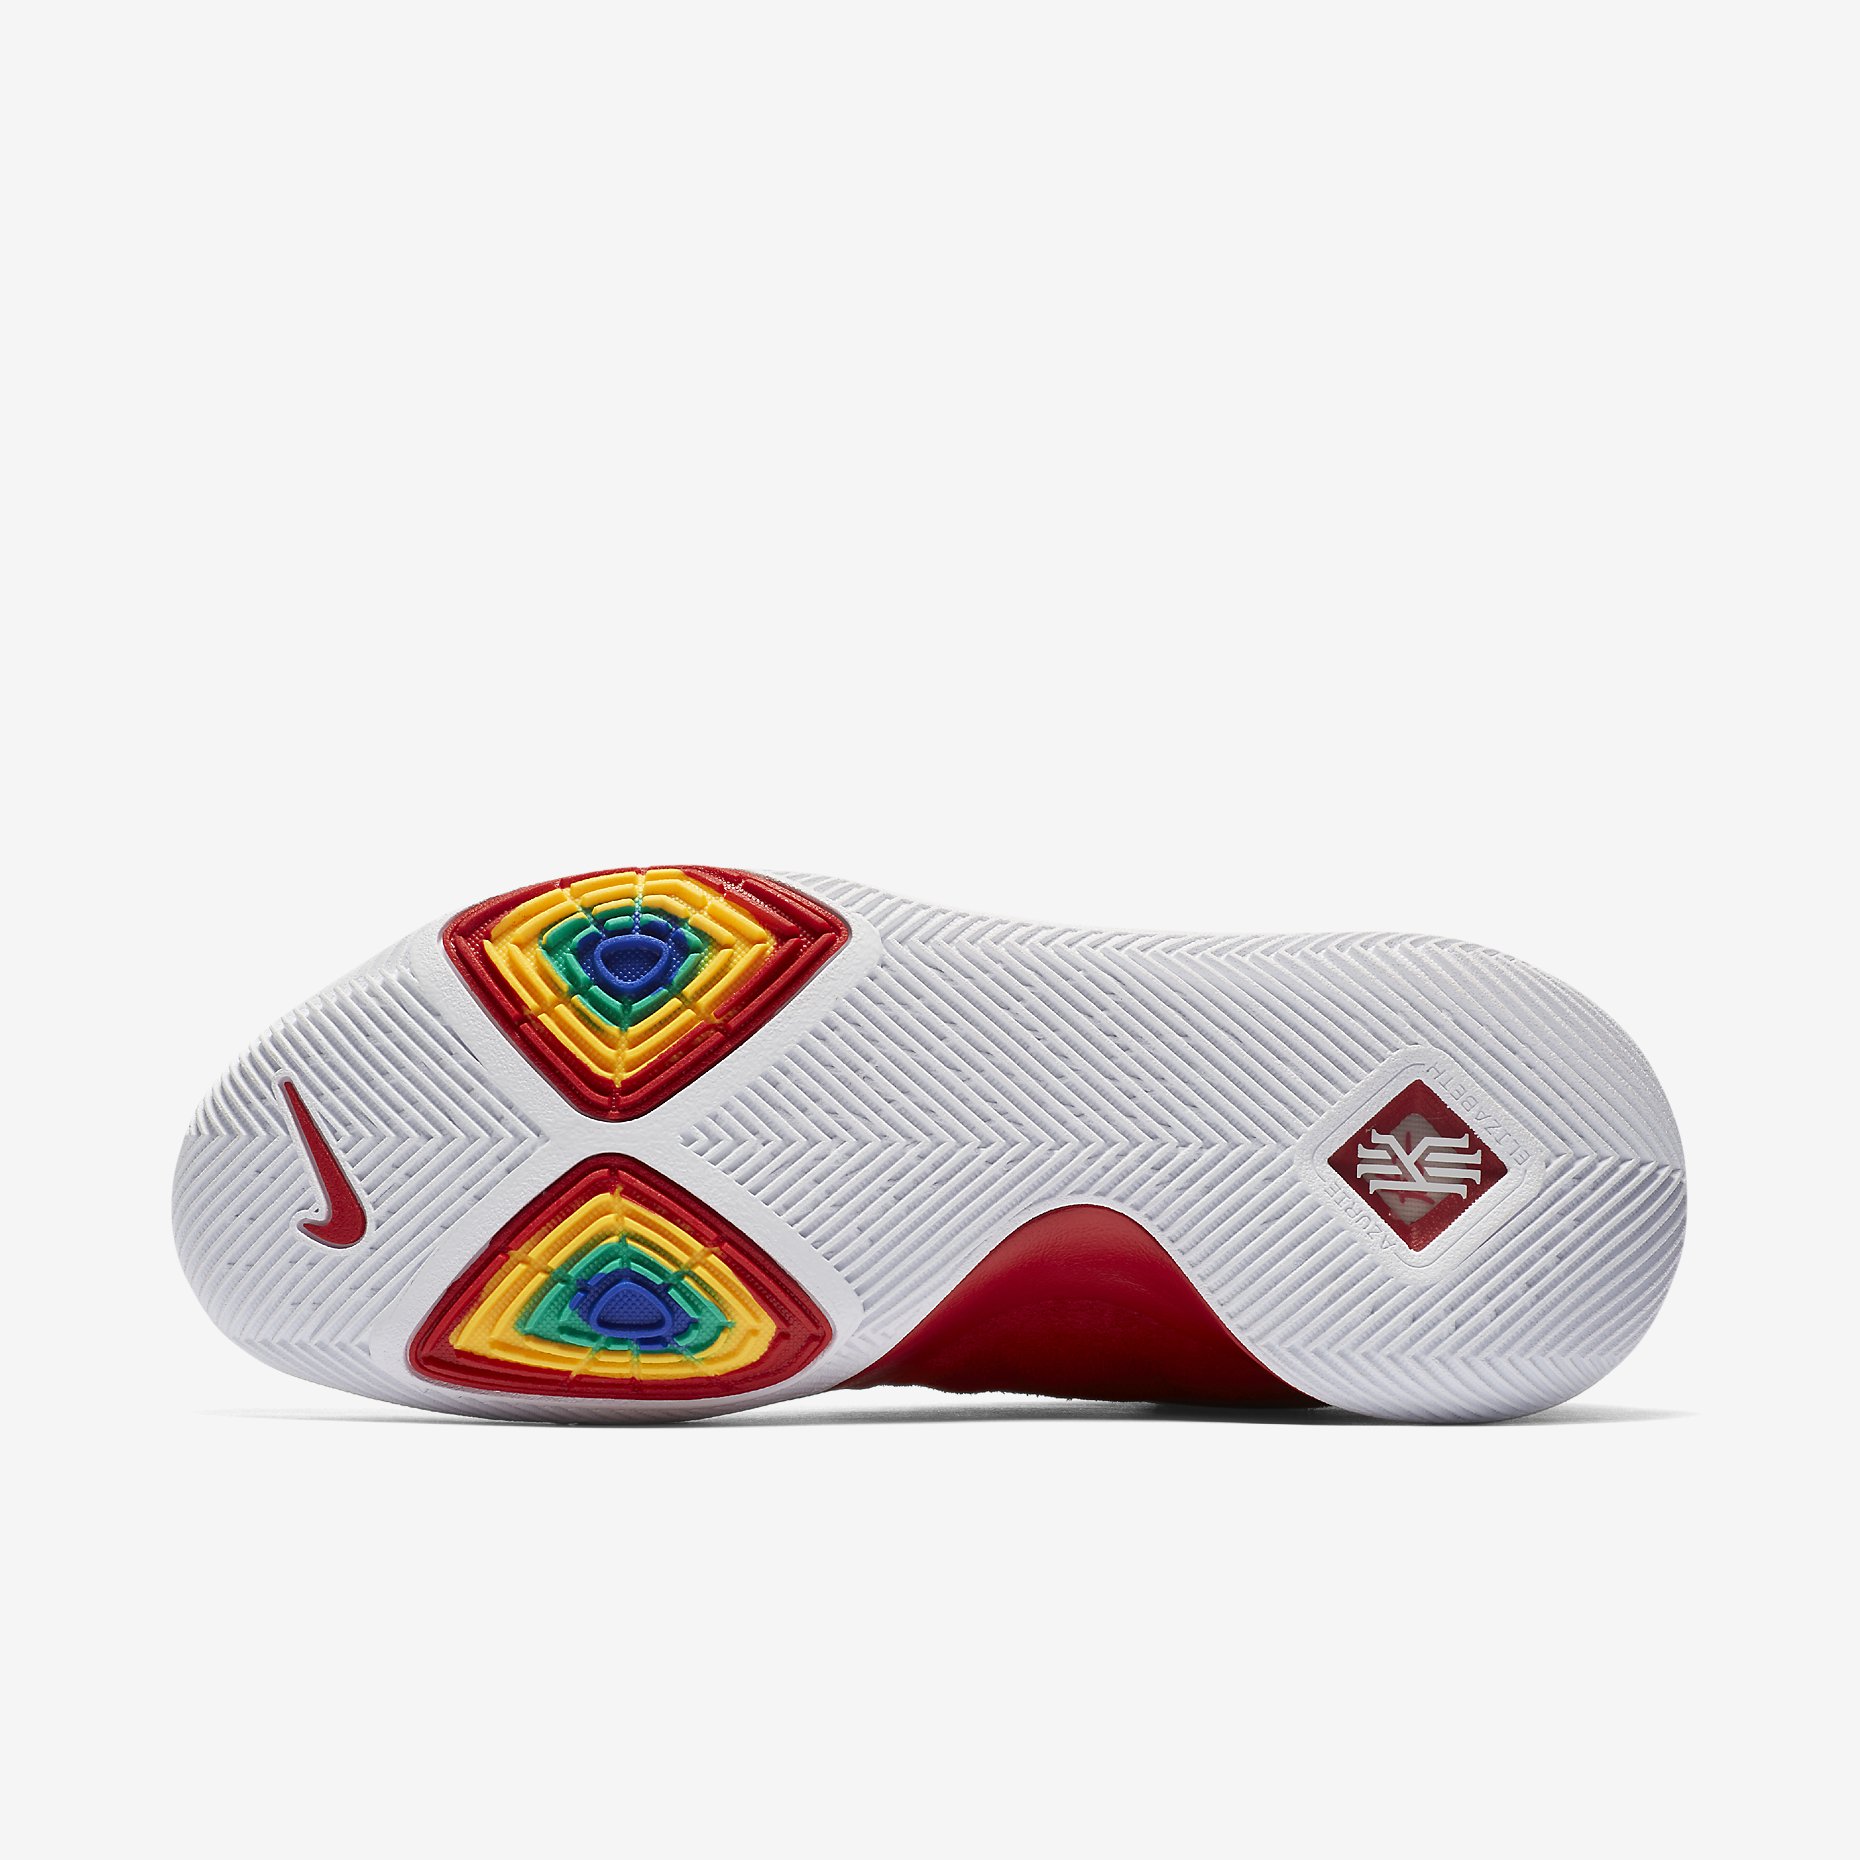 nike-kyrie-3-university-red-suede-6